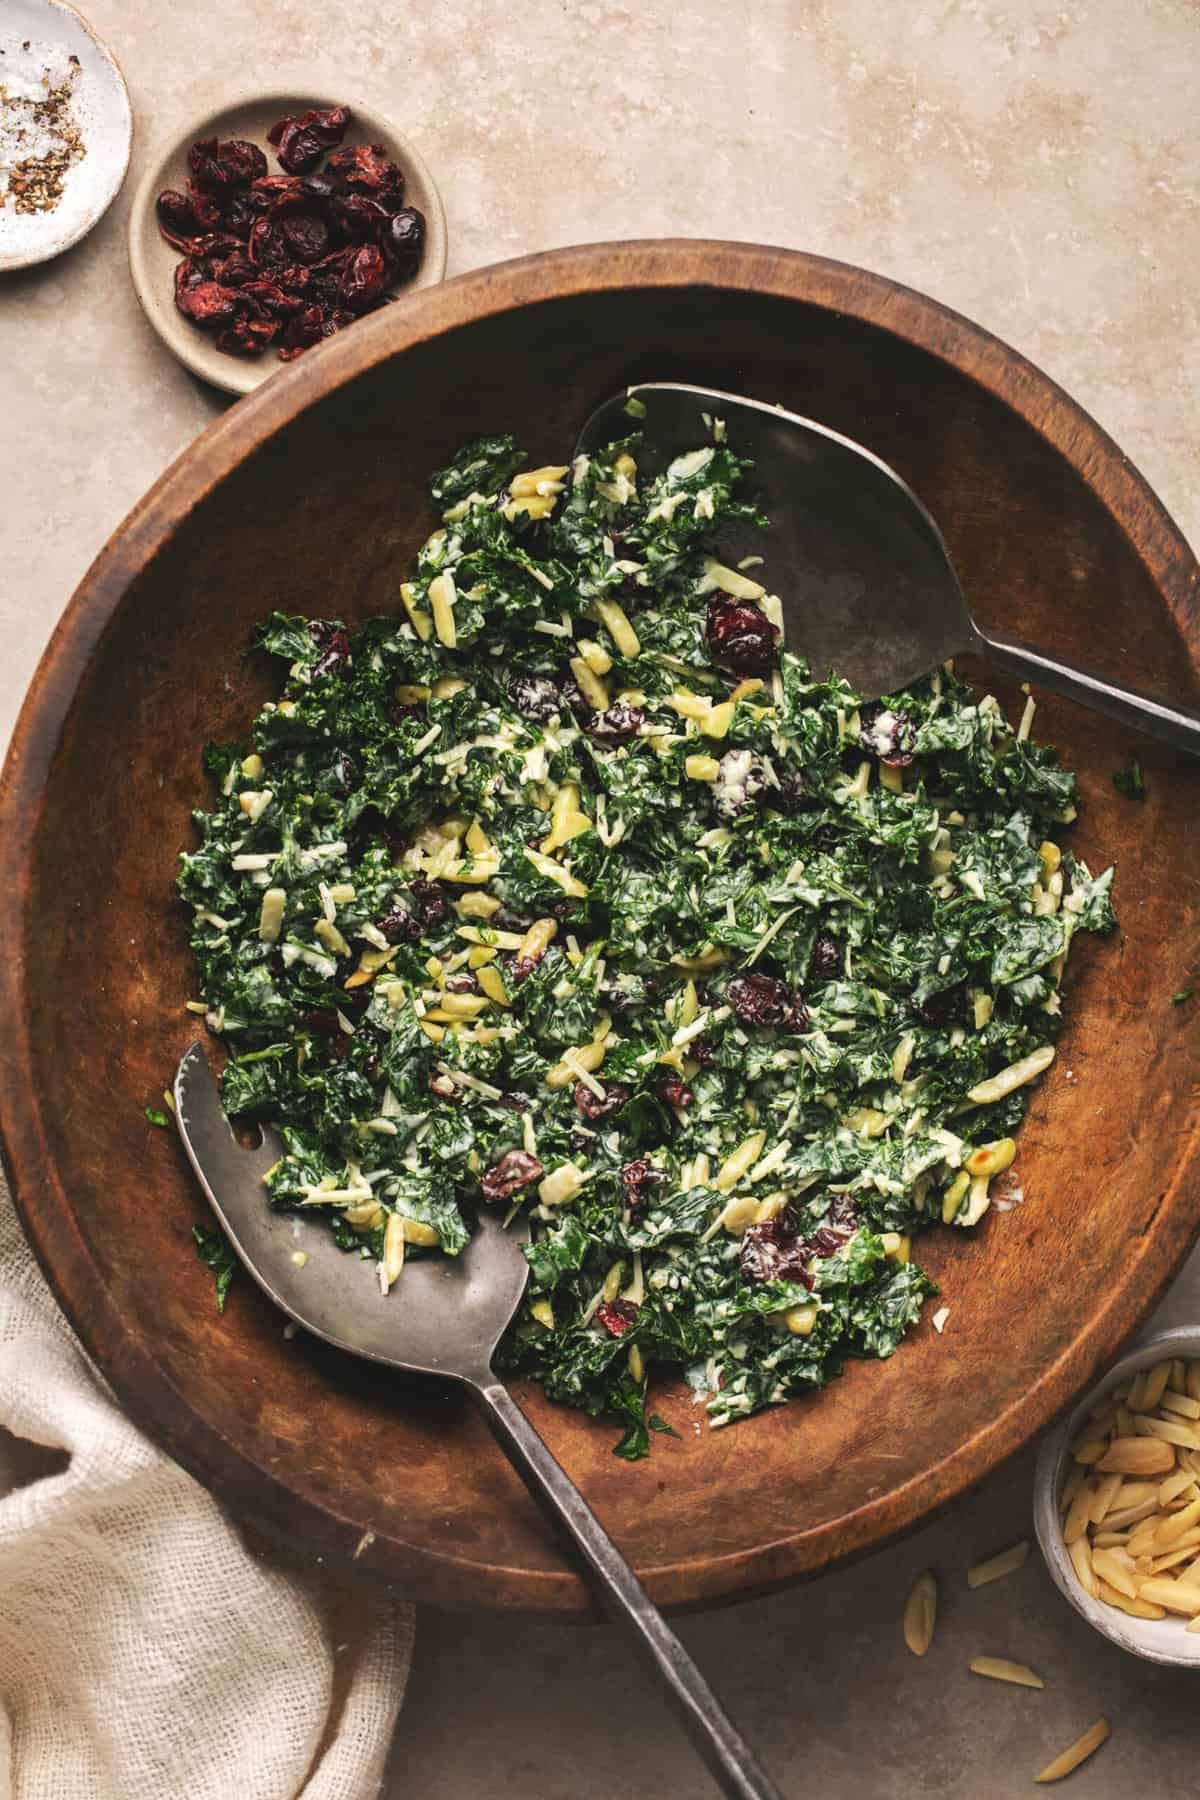 bowl of salad with kale and cranberries tossed with dressing